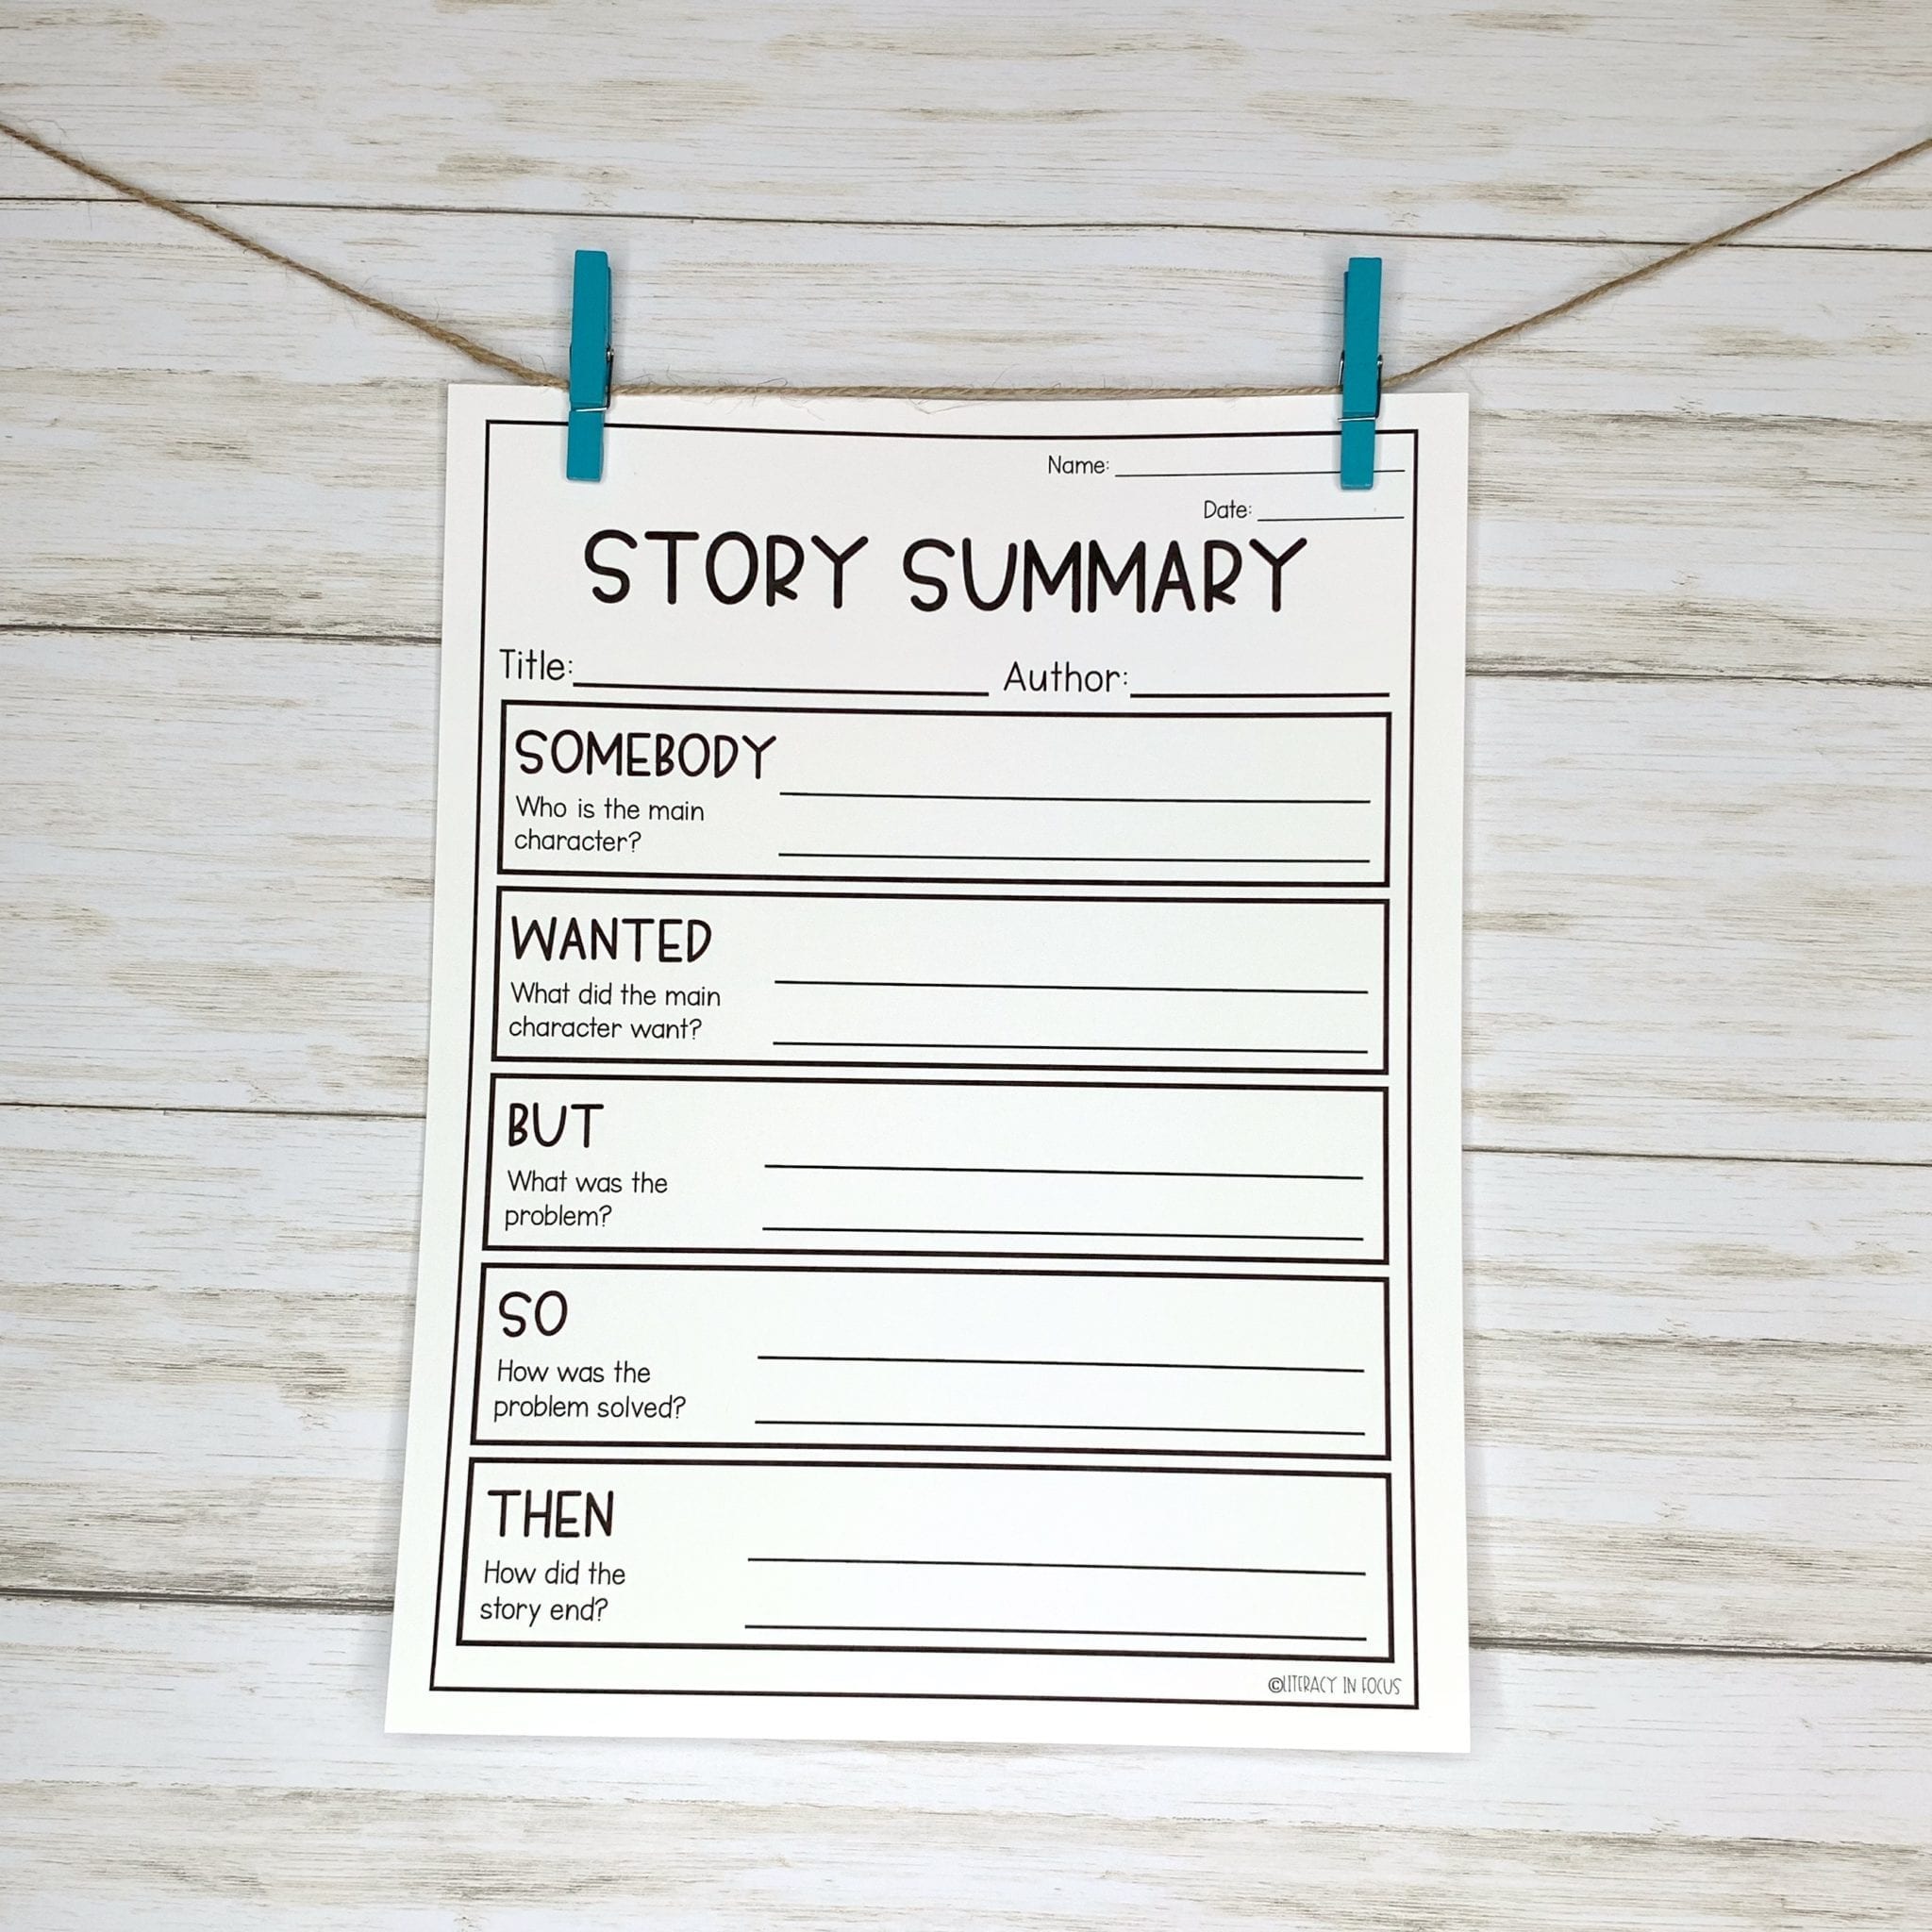 10 Graphic Organizers for Summary Writing - Literacy In Focus